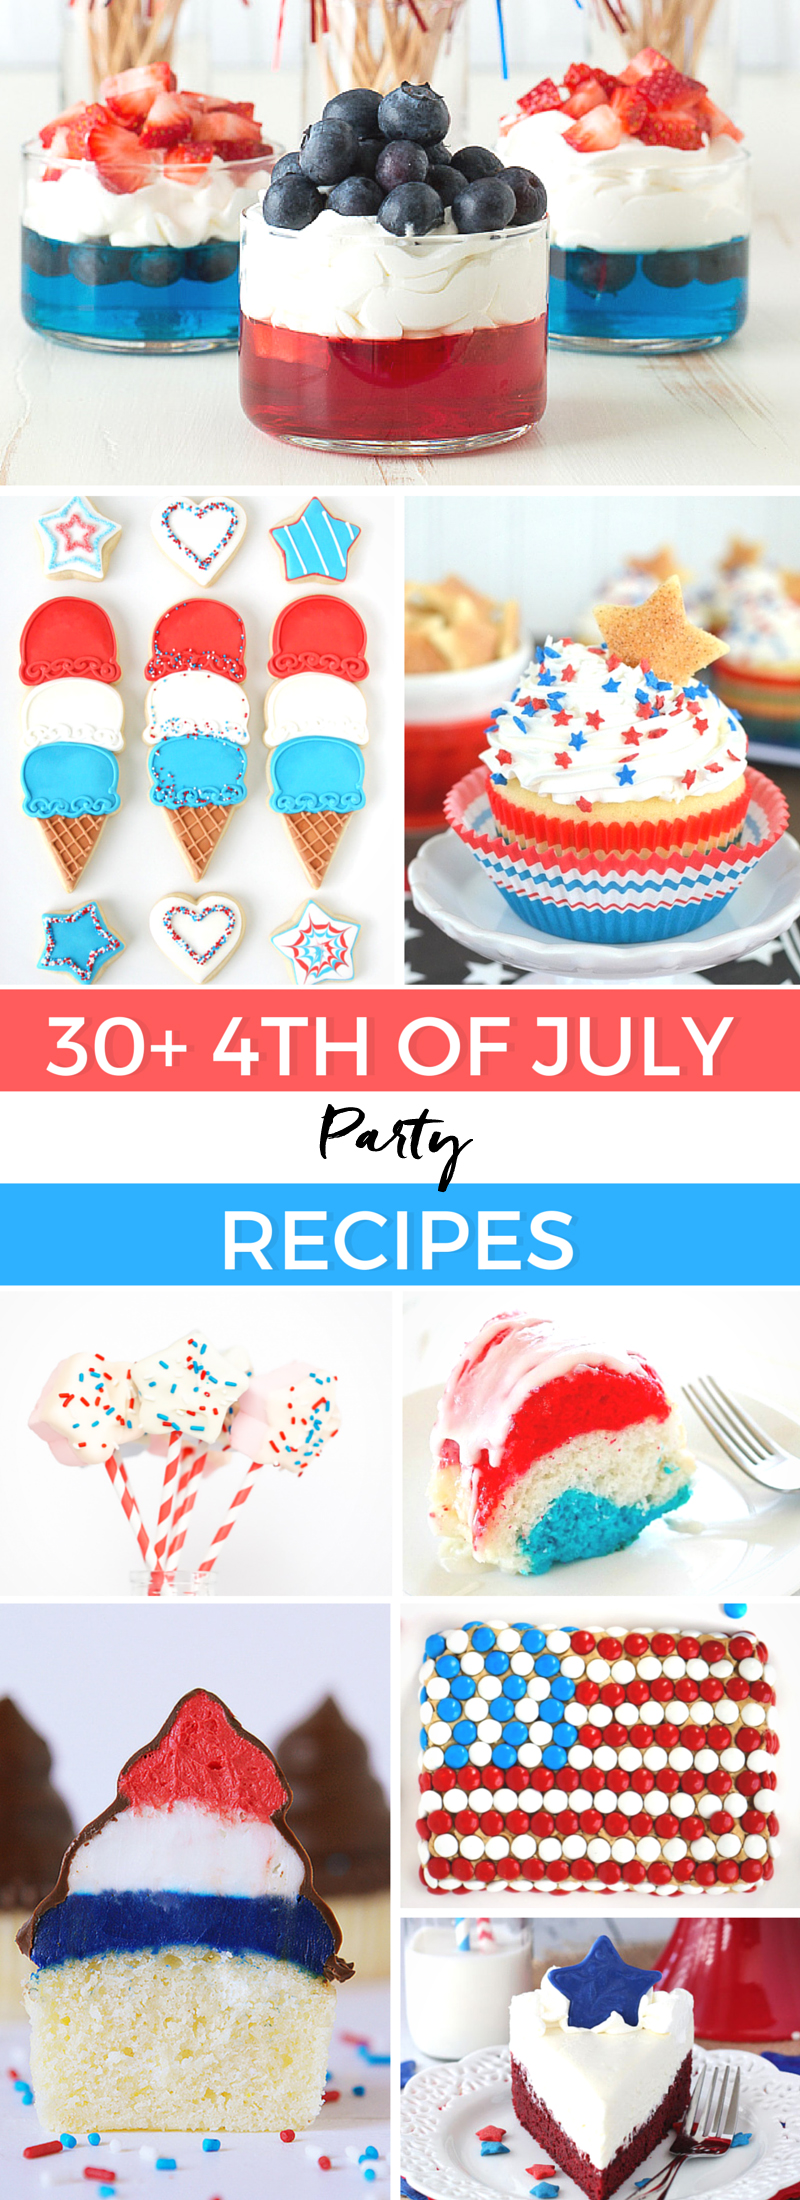 4th of July Party Recipes to make your red, white and blue menu planning a breeze!